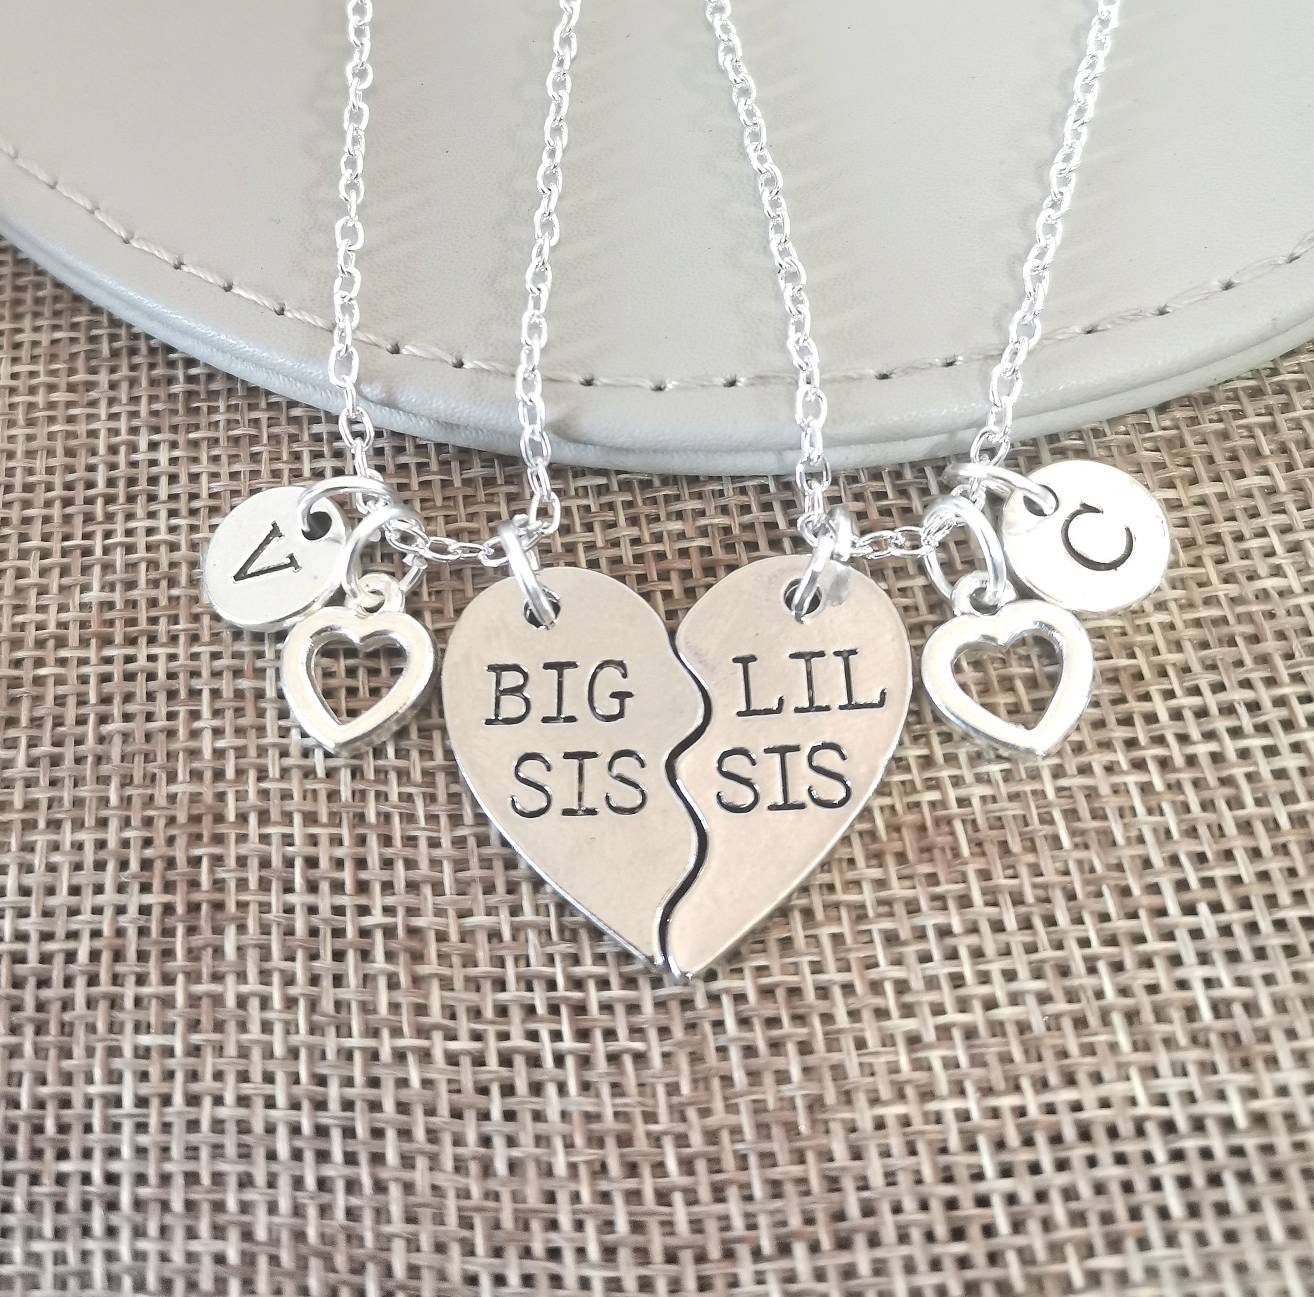 HOFOYA Sisters Necklace Set for 2 3,Big Sis mid Sis Lil Sis Gifts Moon  Charms & Pendants Necklace Jewelry Gift for Big Middle Little Sisters  Friendship Gifts,Best Friends Forever. 2-big-little sisters |